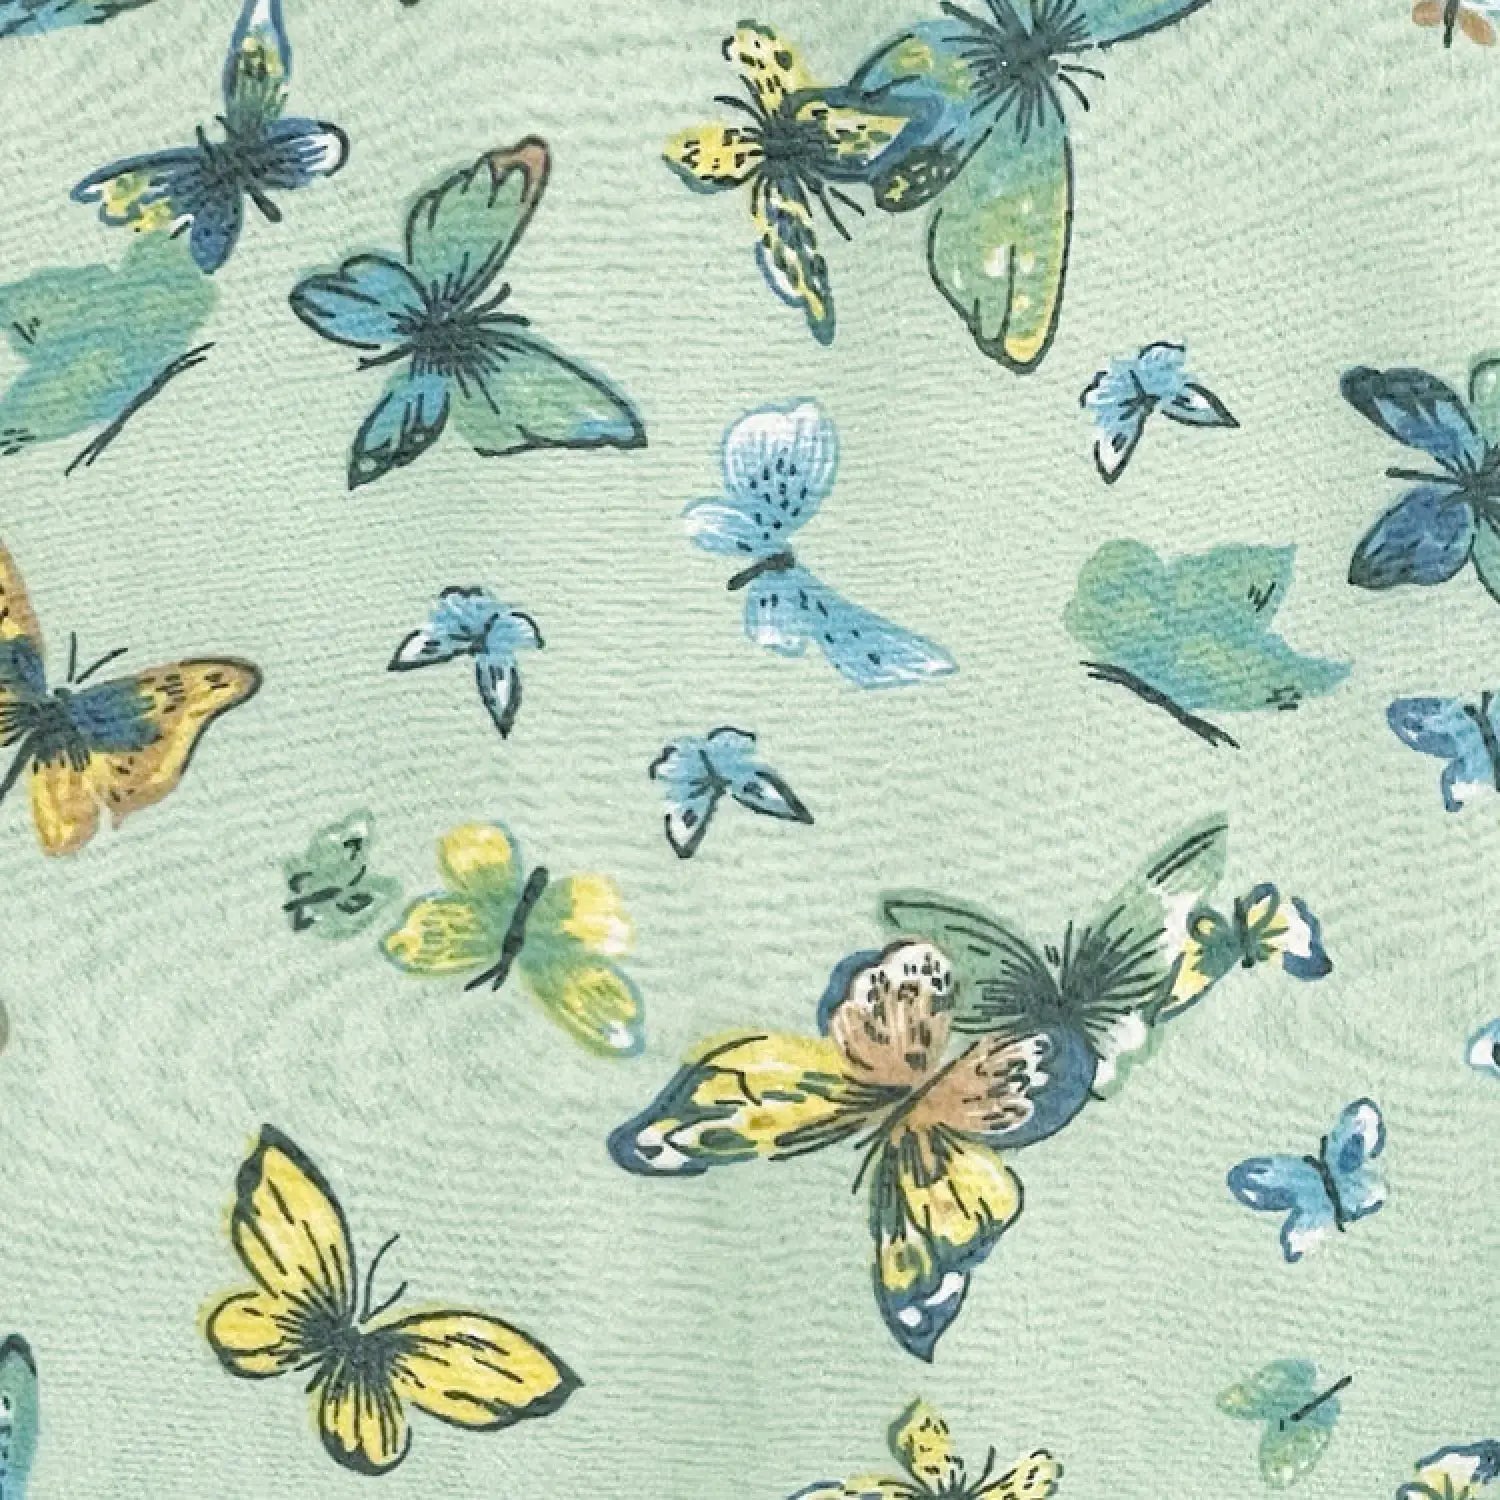 Butterfly print scarf on green background with butterflies